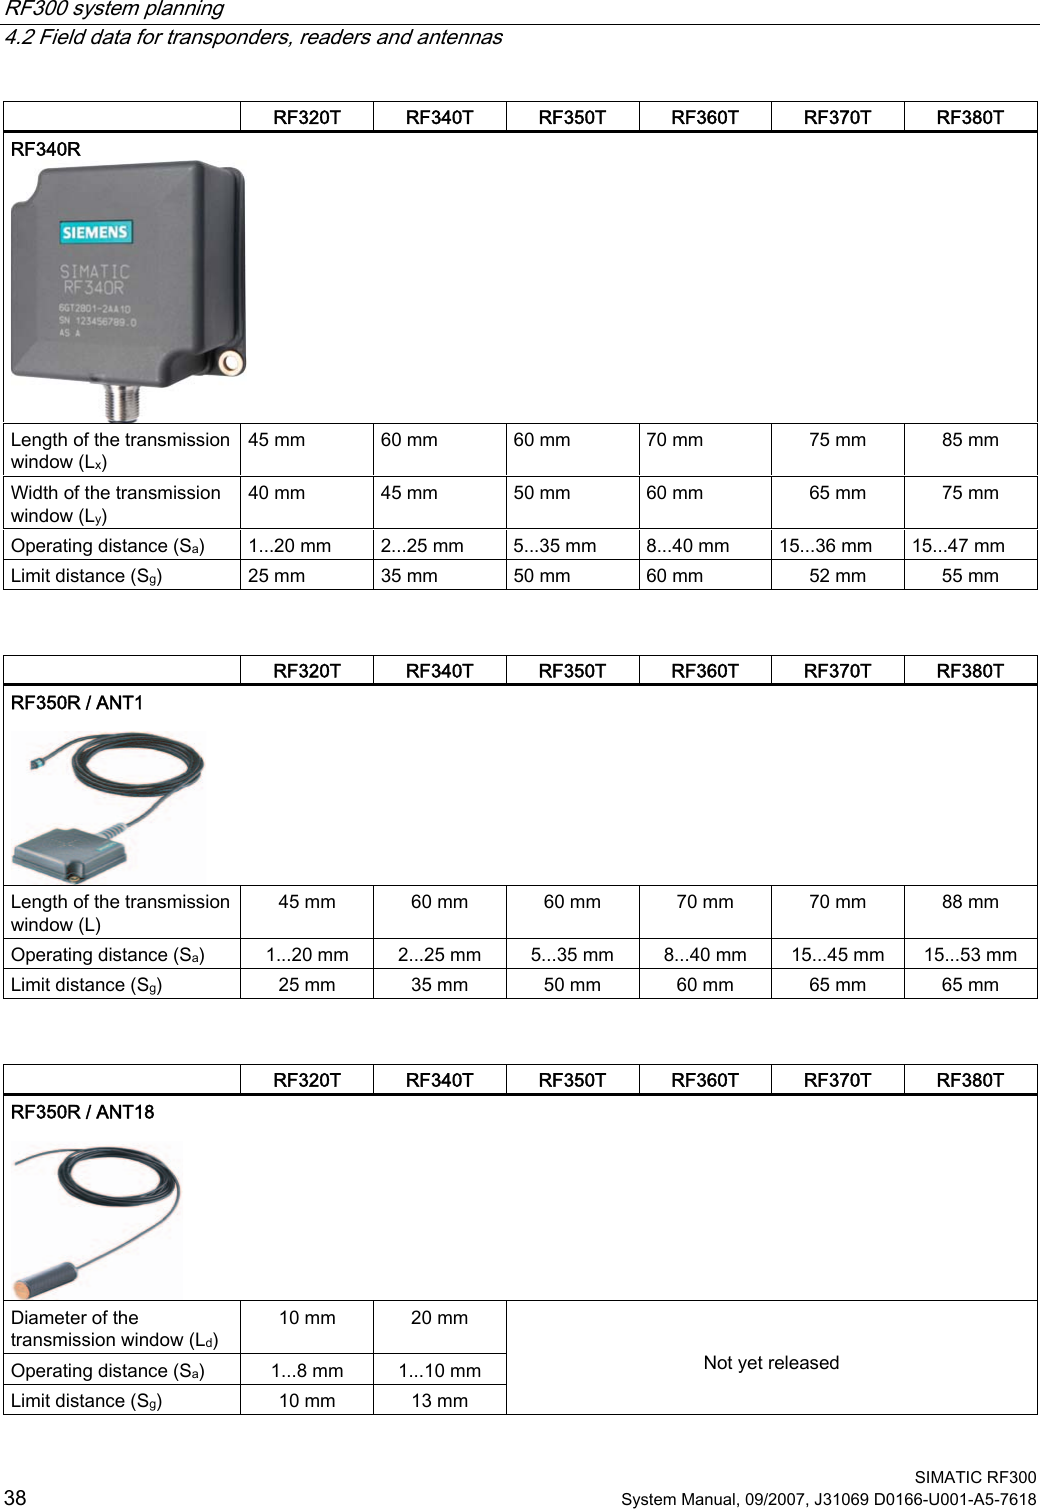 RF300 system planning   4.2 Field data for transponders, readers and antennas  SIMATIC RF300 38 System Manual, 09/2007, J31069 D0166-U001-A5-7618   RF320T  RF340T  RF350T  RF360T  RF370T  RF380T RF340R  Length of the transmission window (Lx) 45 mm  60 mm  60 mm  70 mm  75 mm  85 mm Width of the transmission window (Ly) 40 mm  45 mm  50 mm  60 mm  65 mm  75 mm Operating distance (Sa)  1...20 mm  2...25 mm  5...35 mm  8...40 mm  15...36 mm  15...47 mm Limit distance (Sg)  25 mm  35 mm  50 mm  60 mm  52 mm  55 mm     RF320T  RF340T  RF350T  RF360T  RF370T  RF380T RF350R / ANT1   Length of the transmission window (L) 45 mm  60 mm  60 mm  70 mm  70 mm  88 mm Operating distance (Sa)  1...20 mm  2...25 mm  5...35 mm  8...40 mm  15...45 mm  15...53 mm Limit distance (Sg)  25 mm  35 mm  50 mm  60 mm  65 mm  65 mm     RF320T  RF340T  RF350T  RF360T  RF370T  RF380T RF350R / ANT18   Diameter of the transmission window (Ld) 10 mm  20 mm Operating distance (Sa)  1...8 mm  1...10 mm Limit distance (Sg)  10 mm  13 mm   Not yet released  